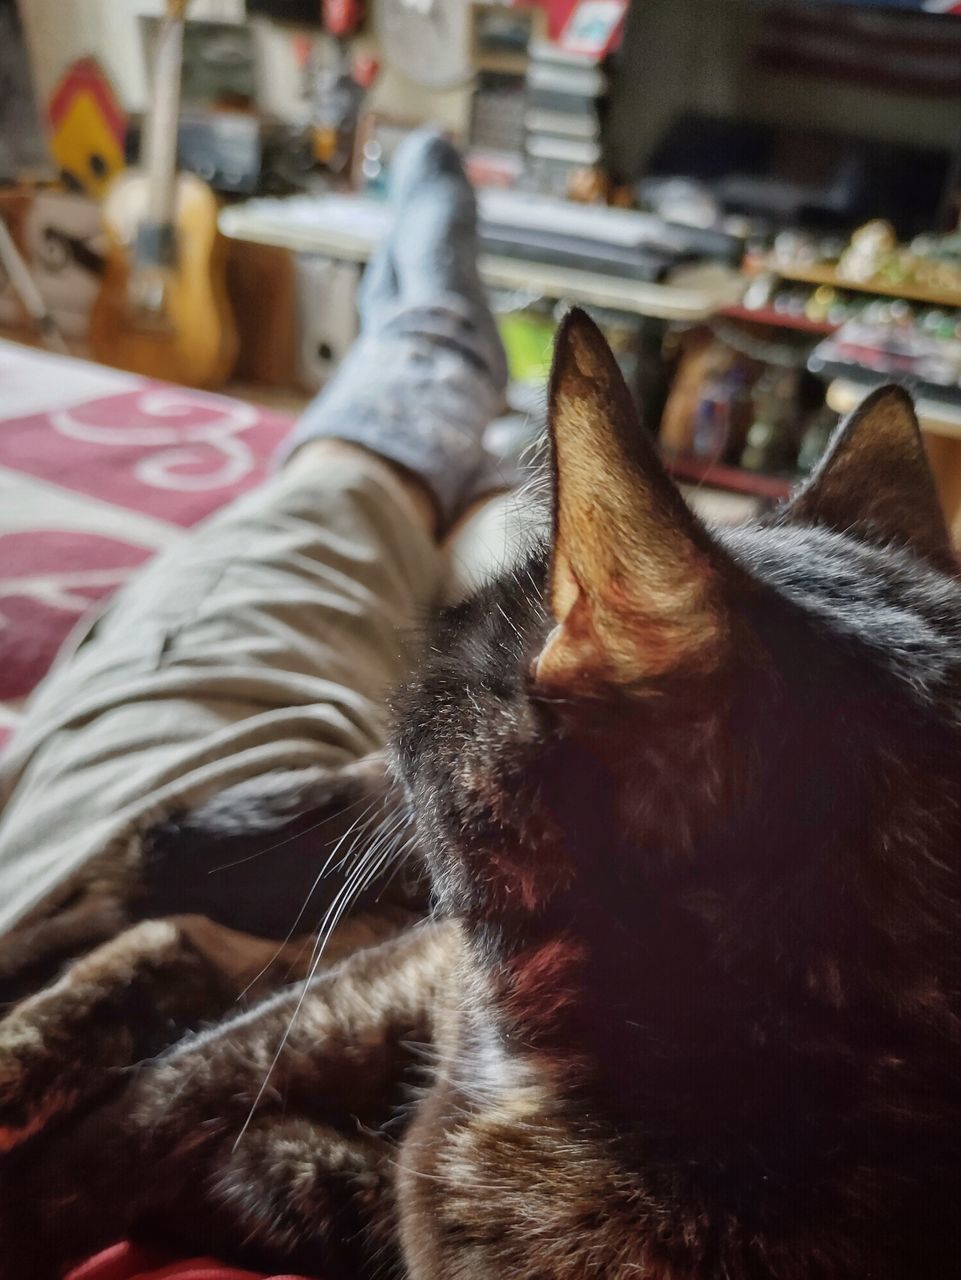 cat, mammal, domestic animals, pet, animal, animal themes, one animal, domestic cat, feline, indoors, relaxation, felidae, small to medium-sized cats, focus on foreground, lying down, close-up, furniture, carnivore, whiskers, one person, animal body part, resting, home interior